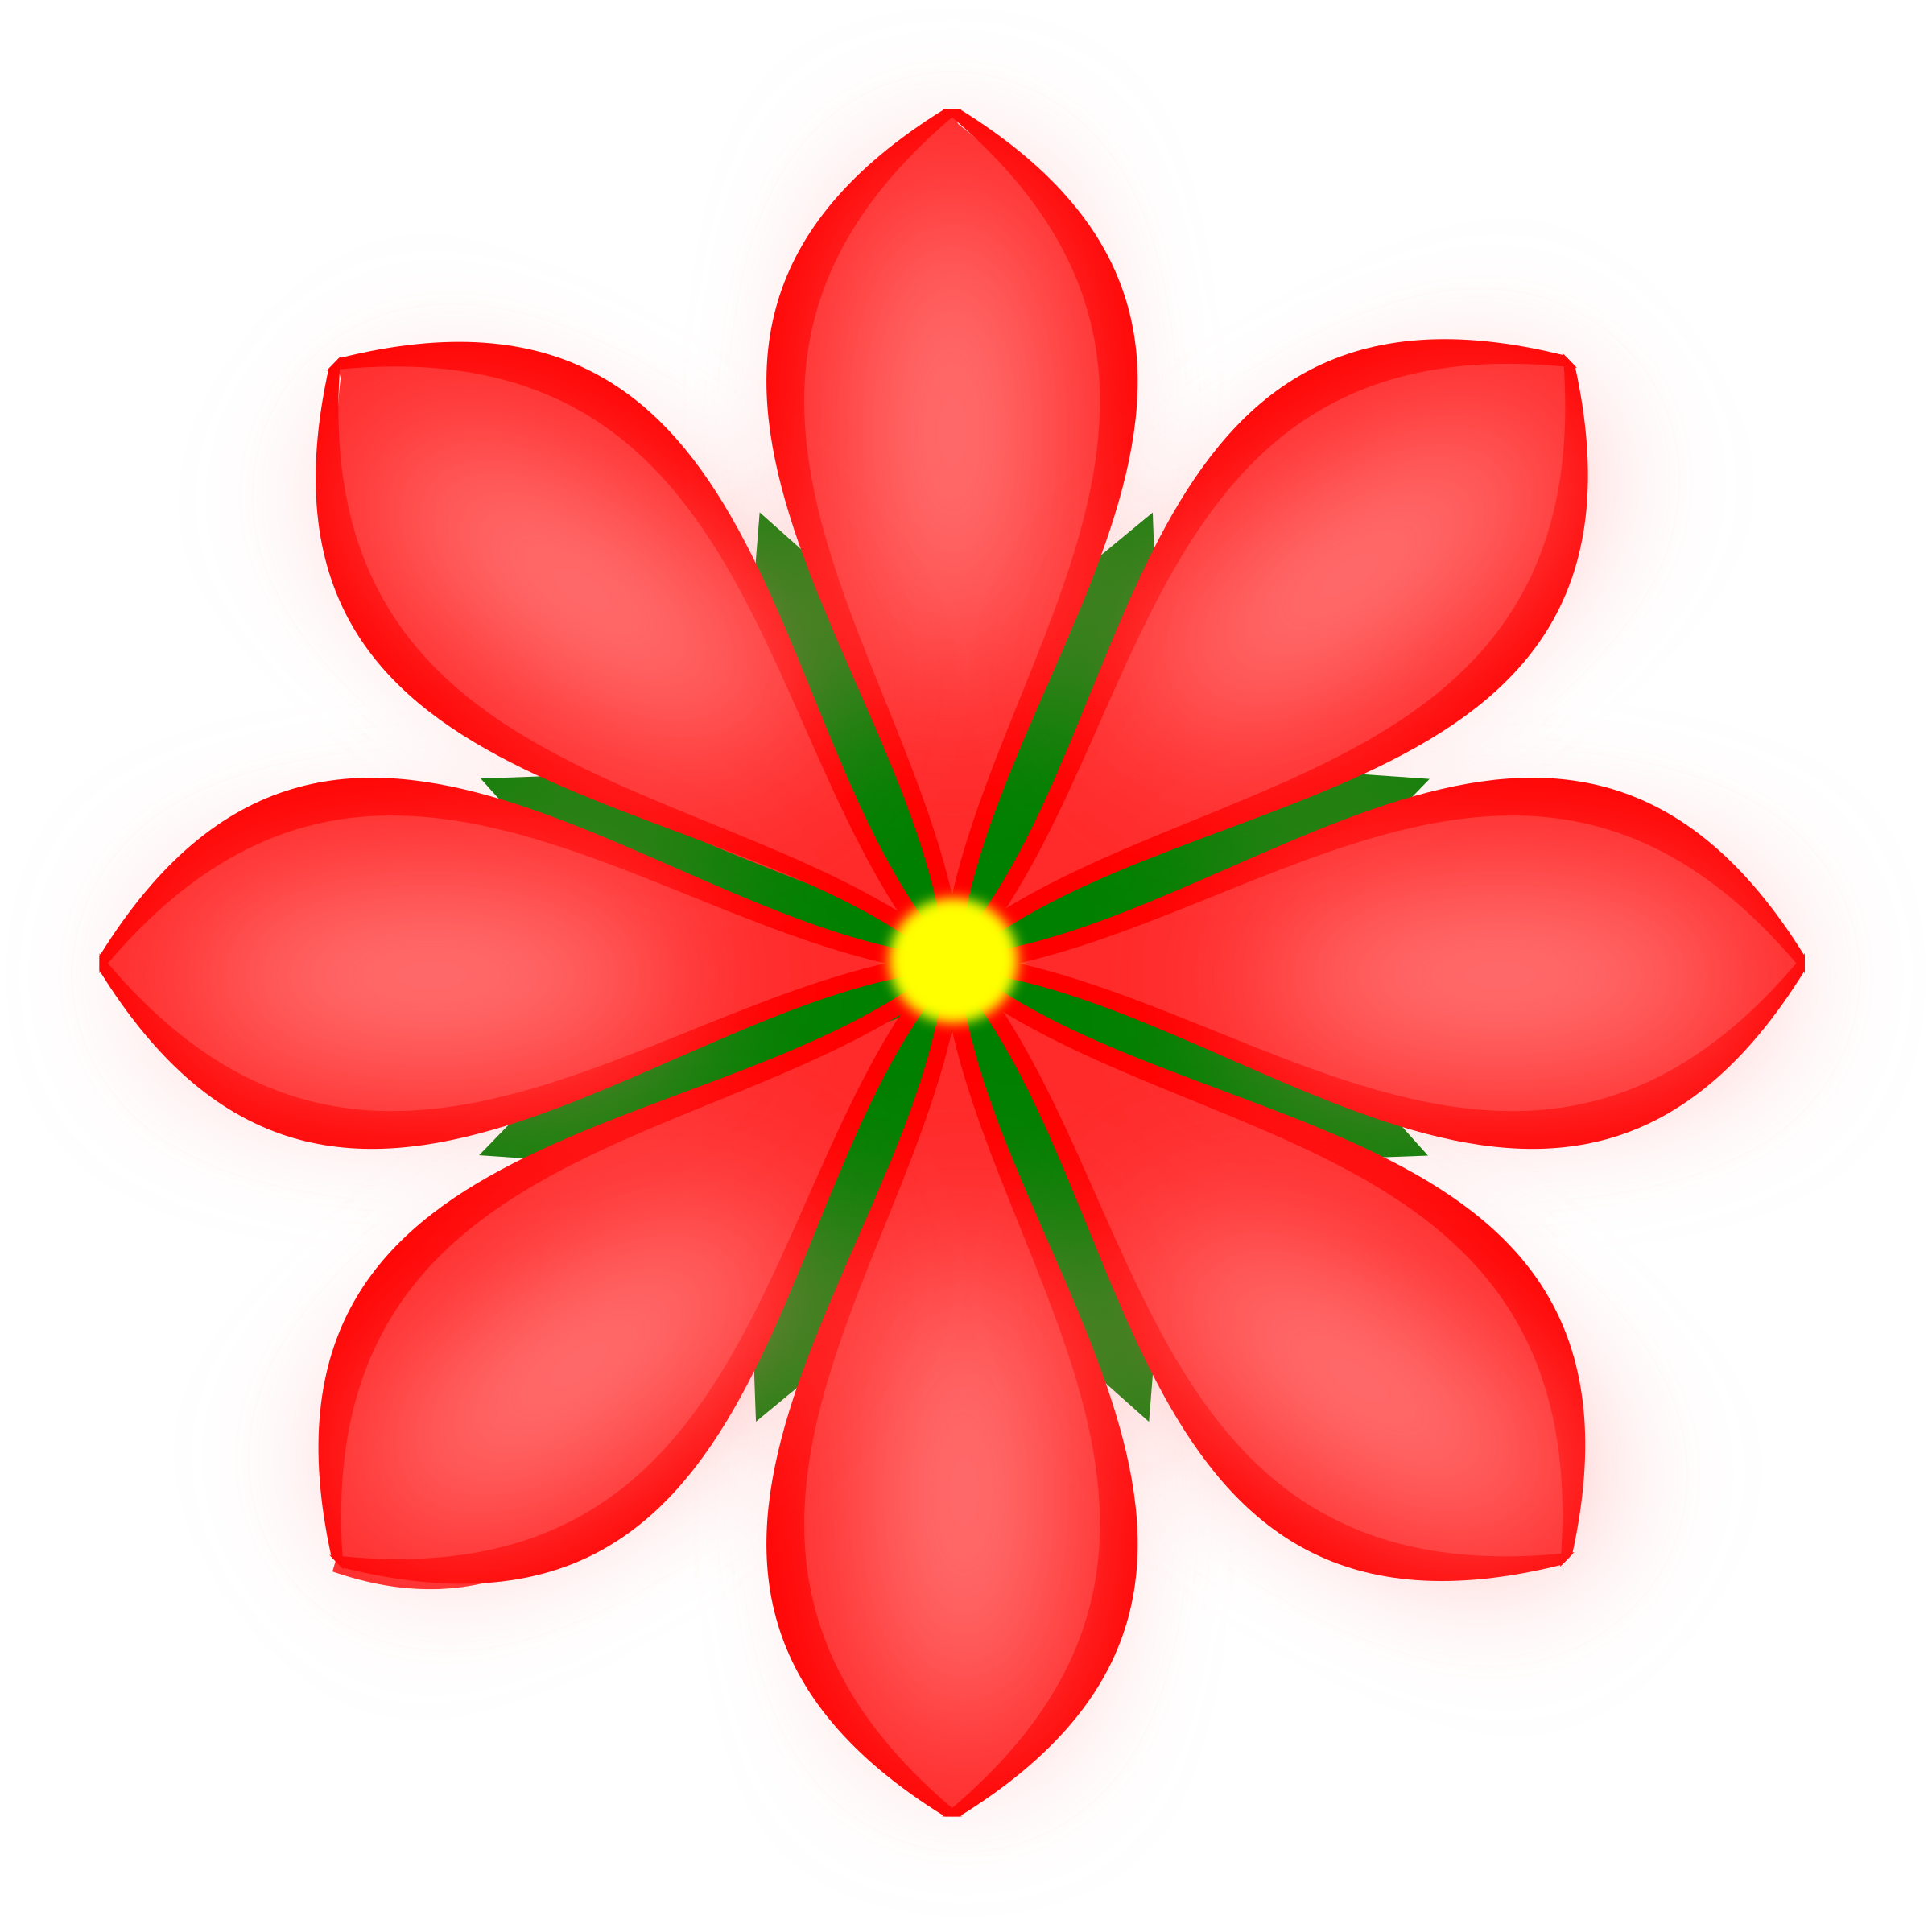 Red Flower vector image - Free stock photo - Public Domain photo - CC0 ...